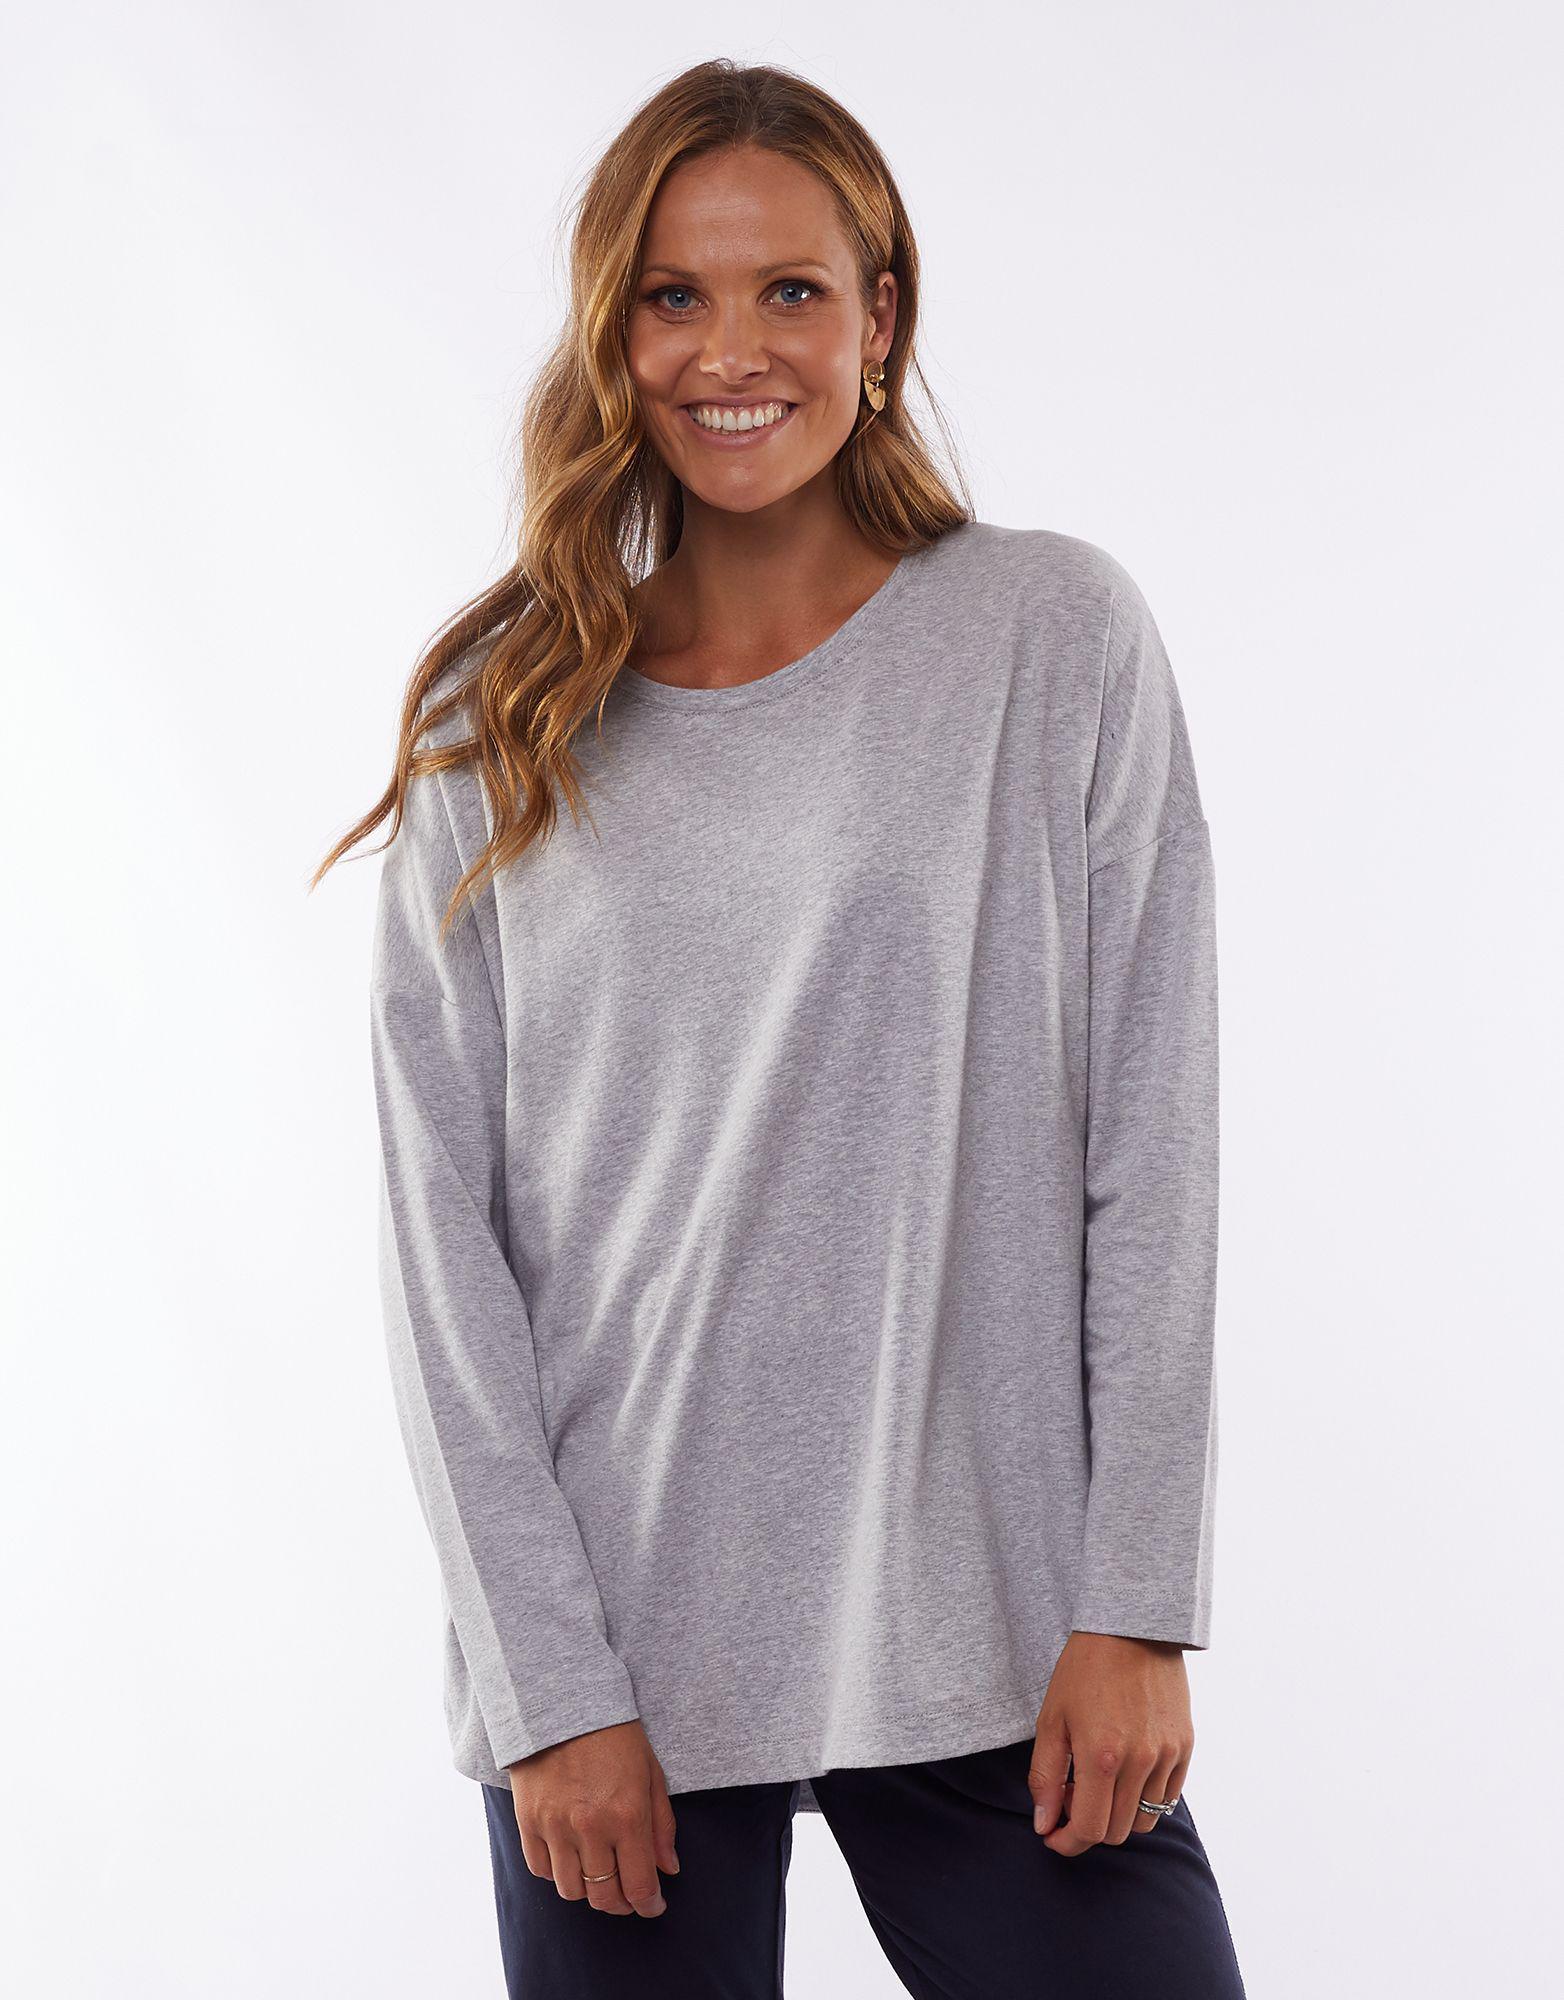 Society L/S Tee - Grey Marle - Elm Lifestyle - FUDGE Gifts Home Lifestyle